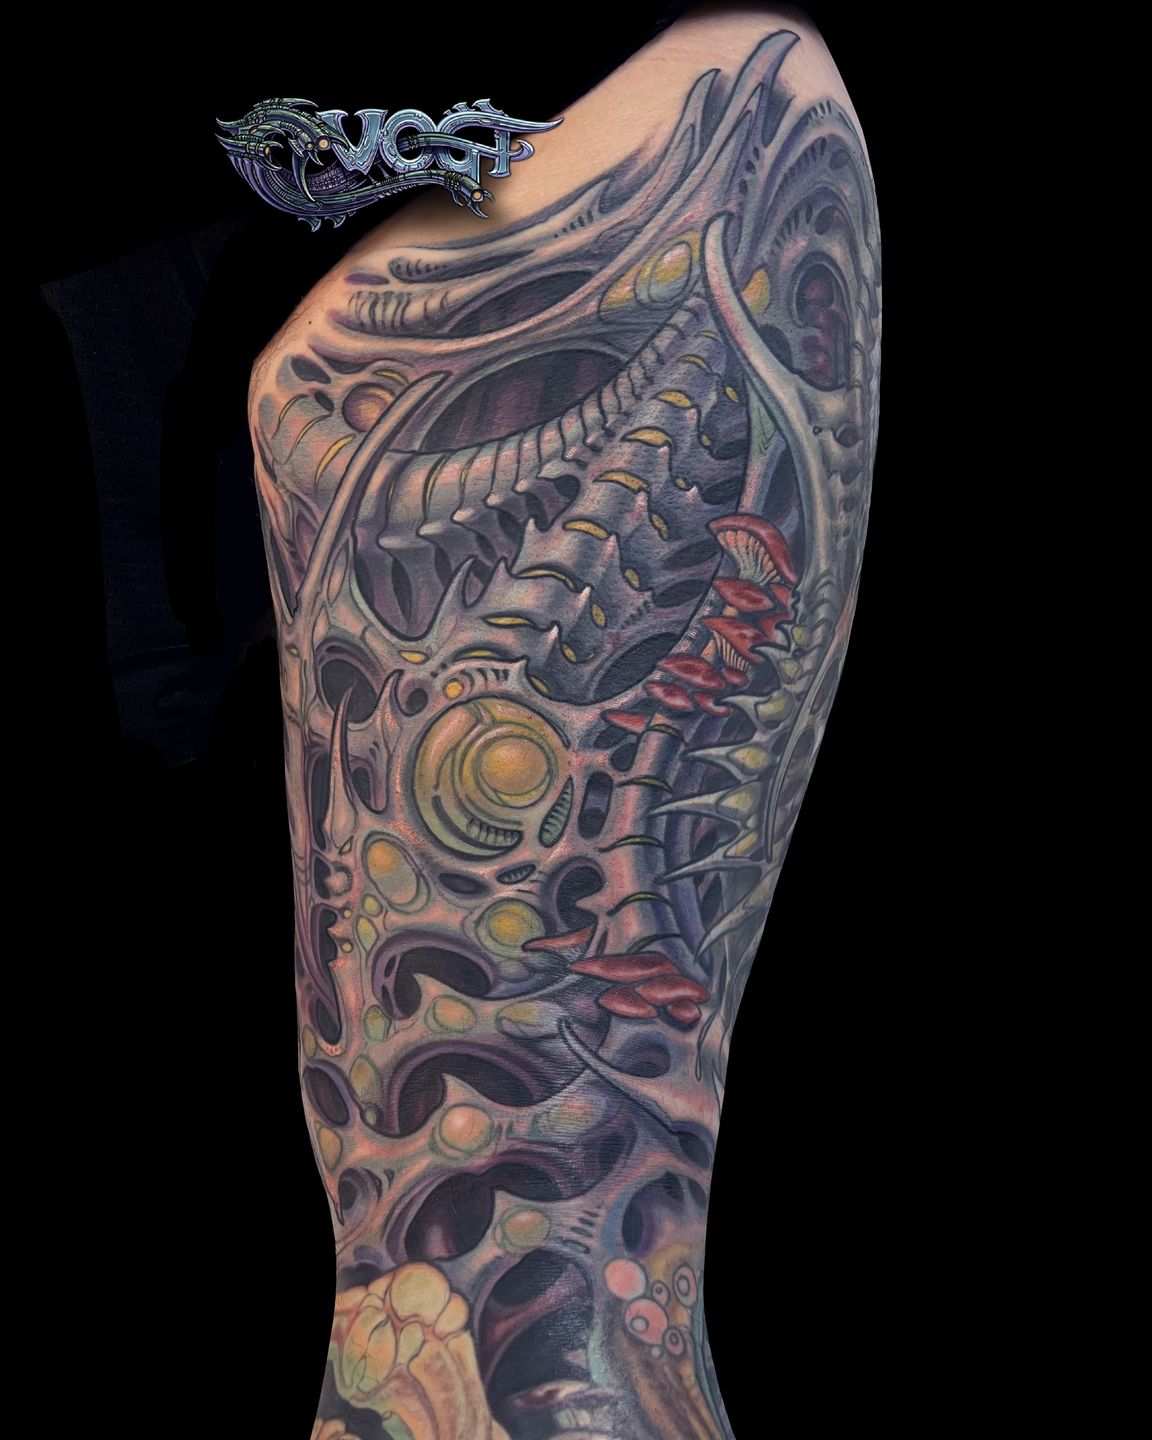 Moi Marston | Top Vancouver Tattoo Artist | The Fall